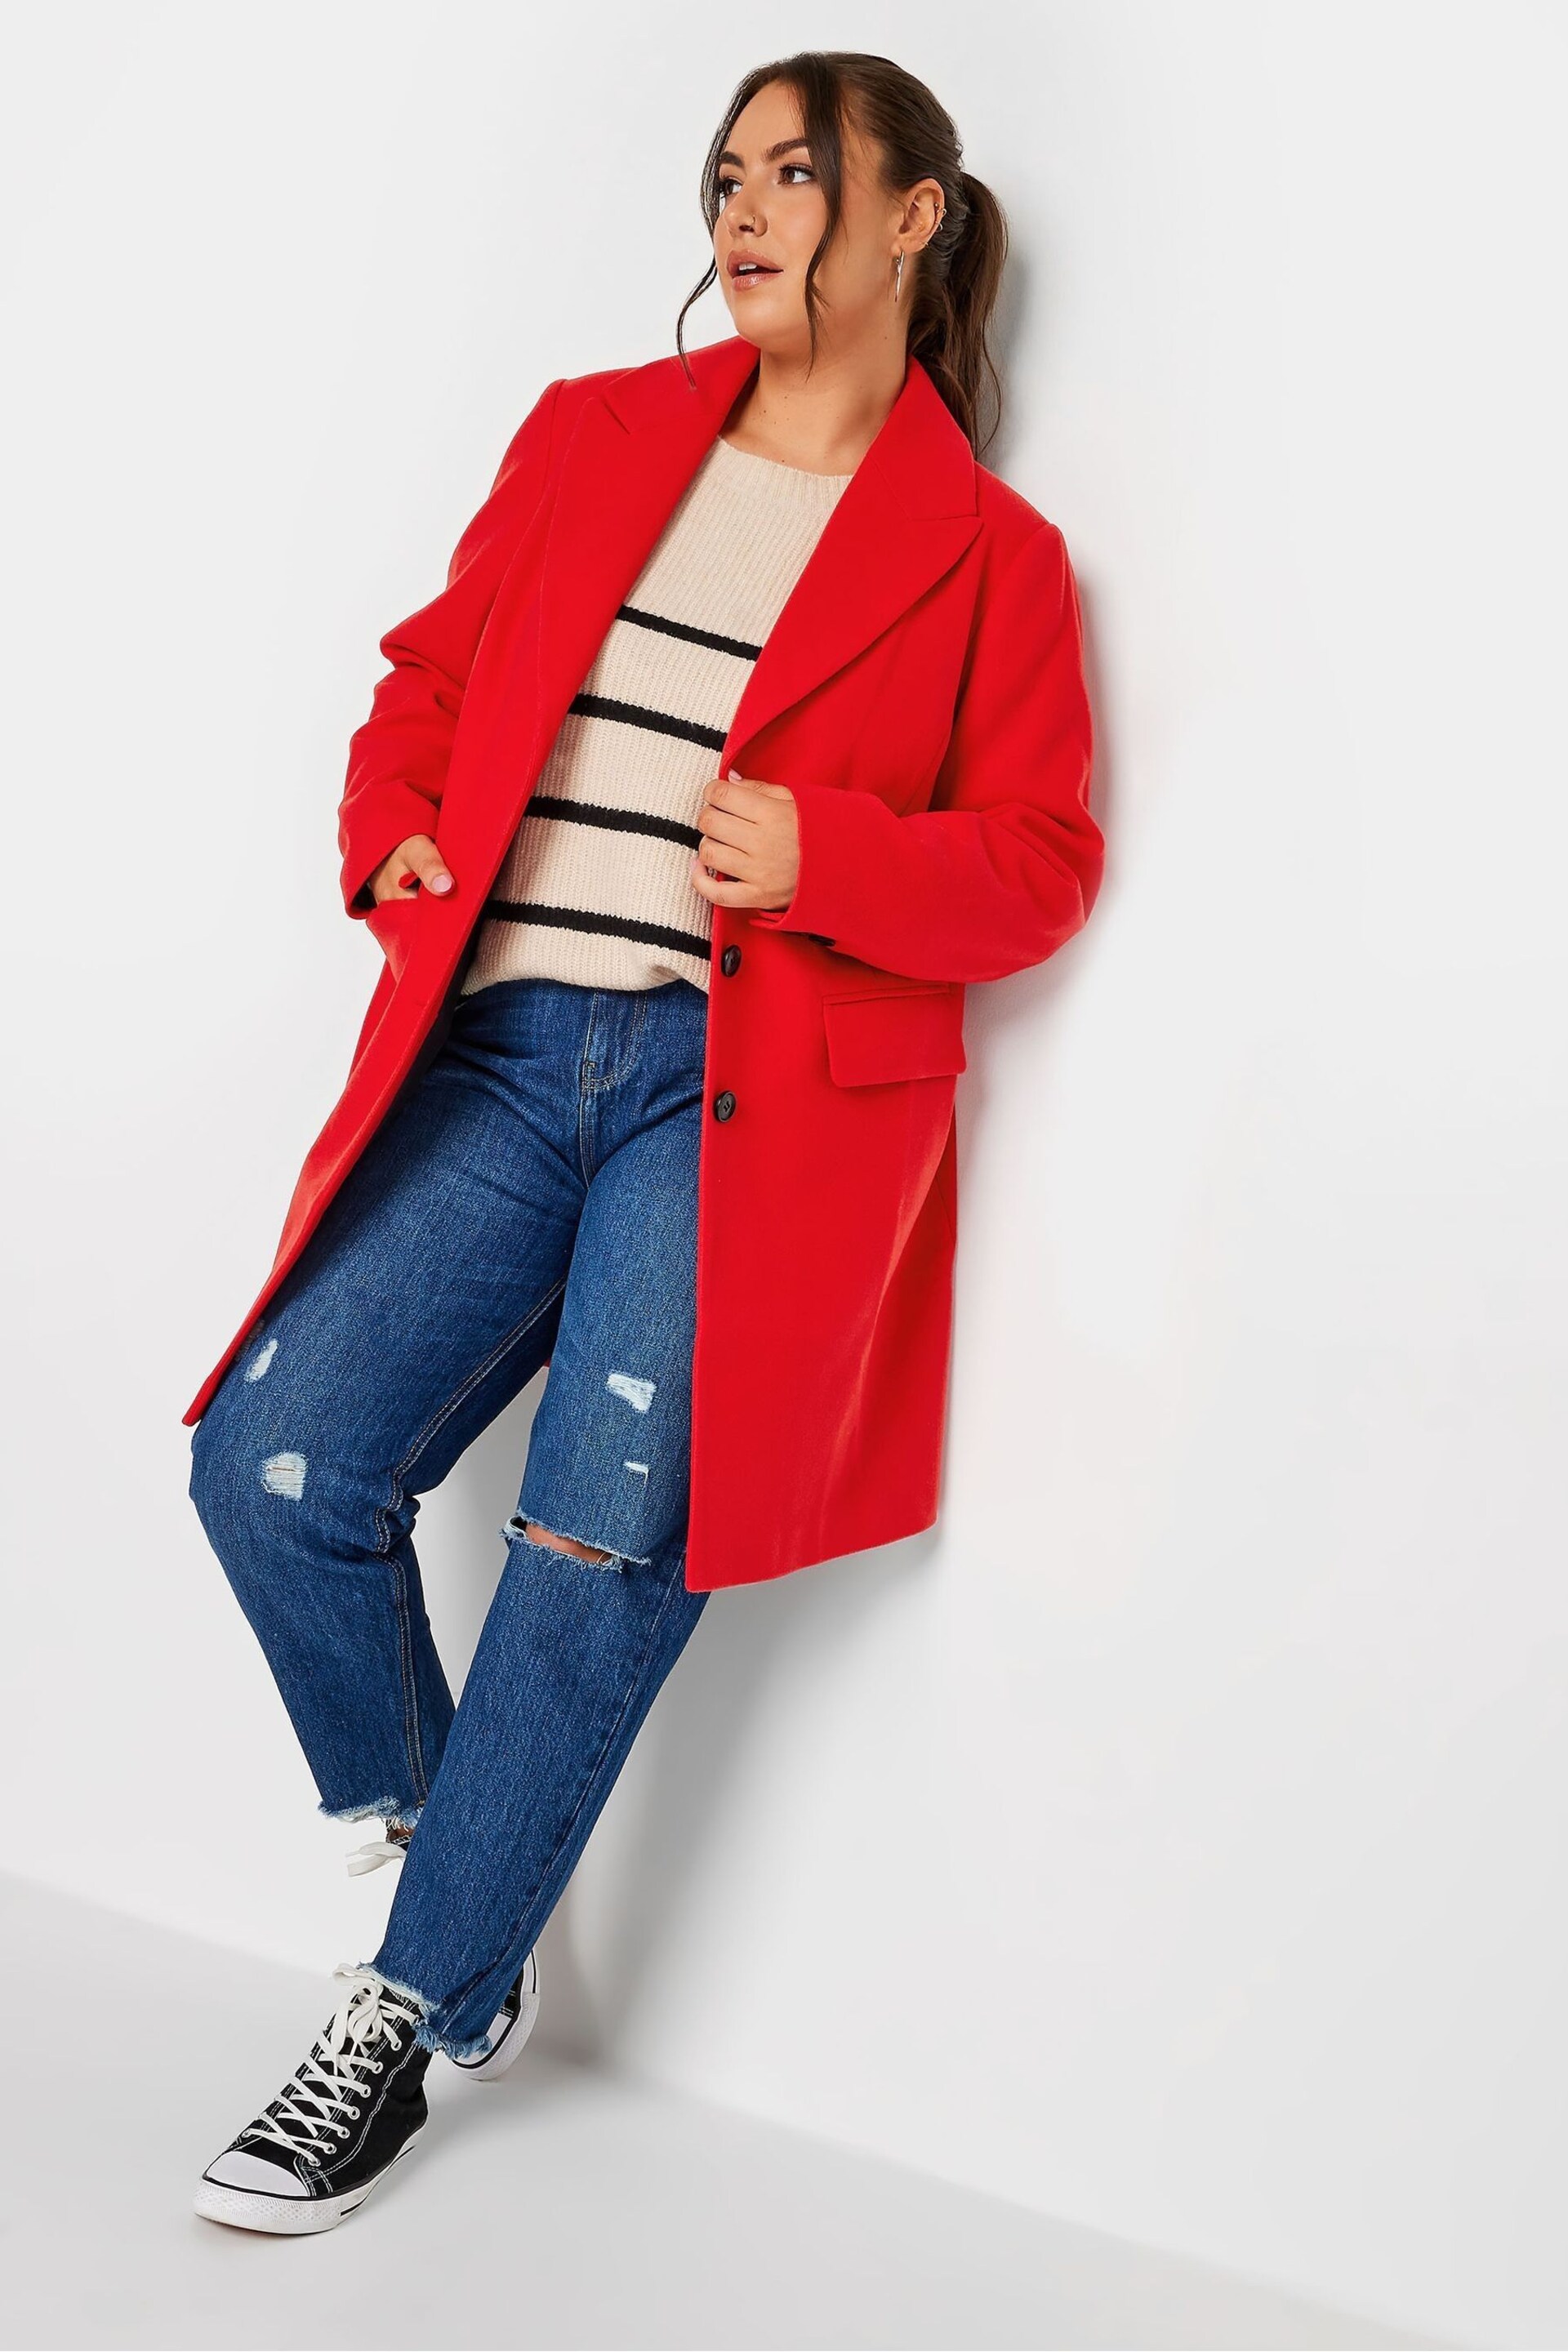 Yours Curve Red Midi City Coat - Image 2 of 4